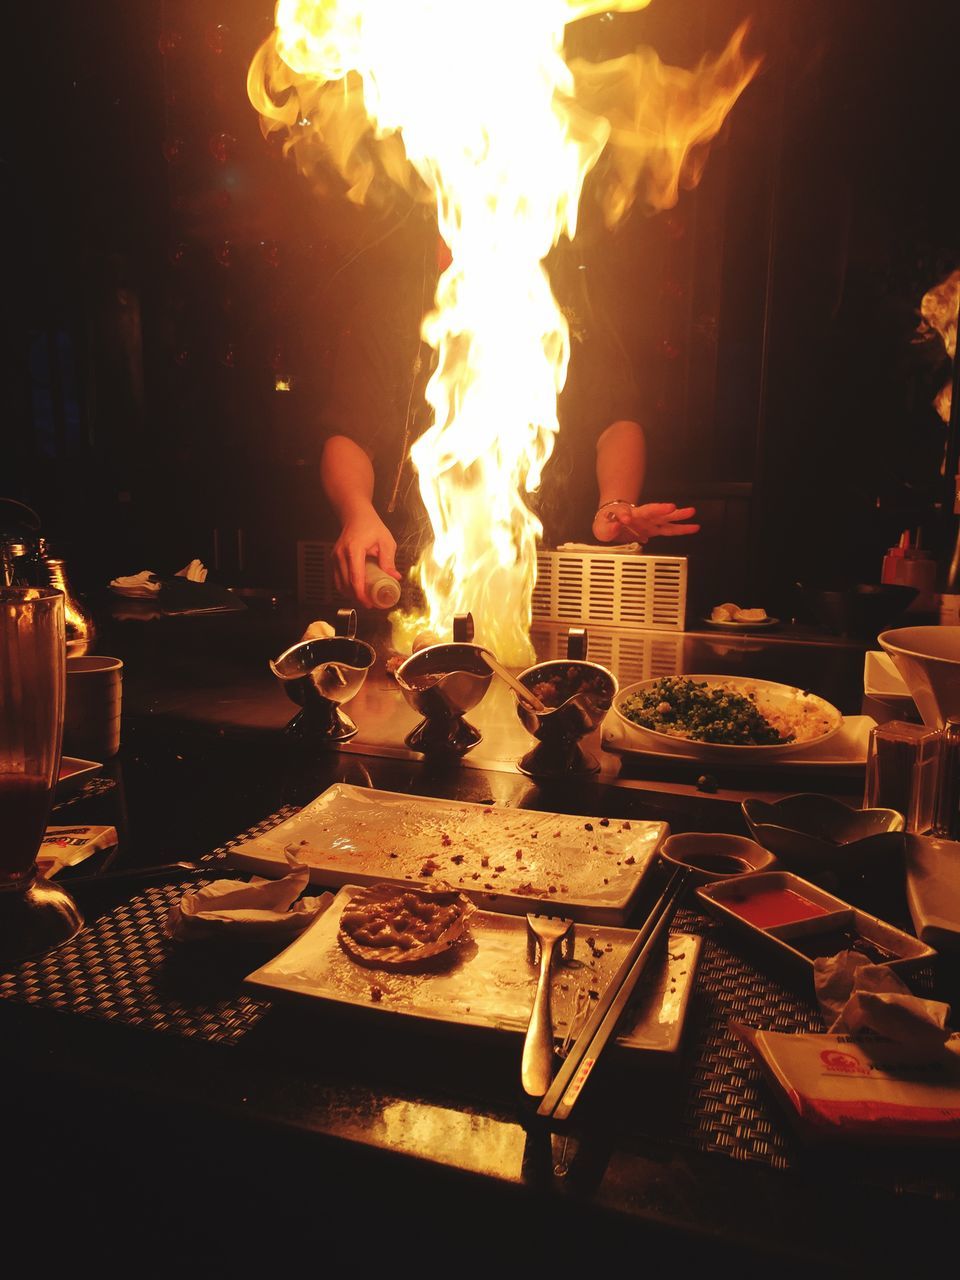 food and drink, food, table, indoors, freshness, night, restaurant, ready-to-eat, illuminated, plate, burning, flame, indulgence, still life, fire - natural phenomenon, meal, unhealthy eating, serving size, heat - temperature, no people